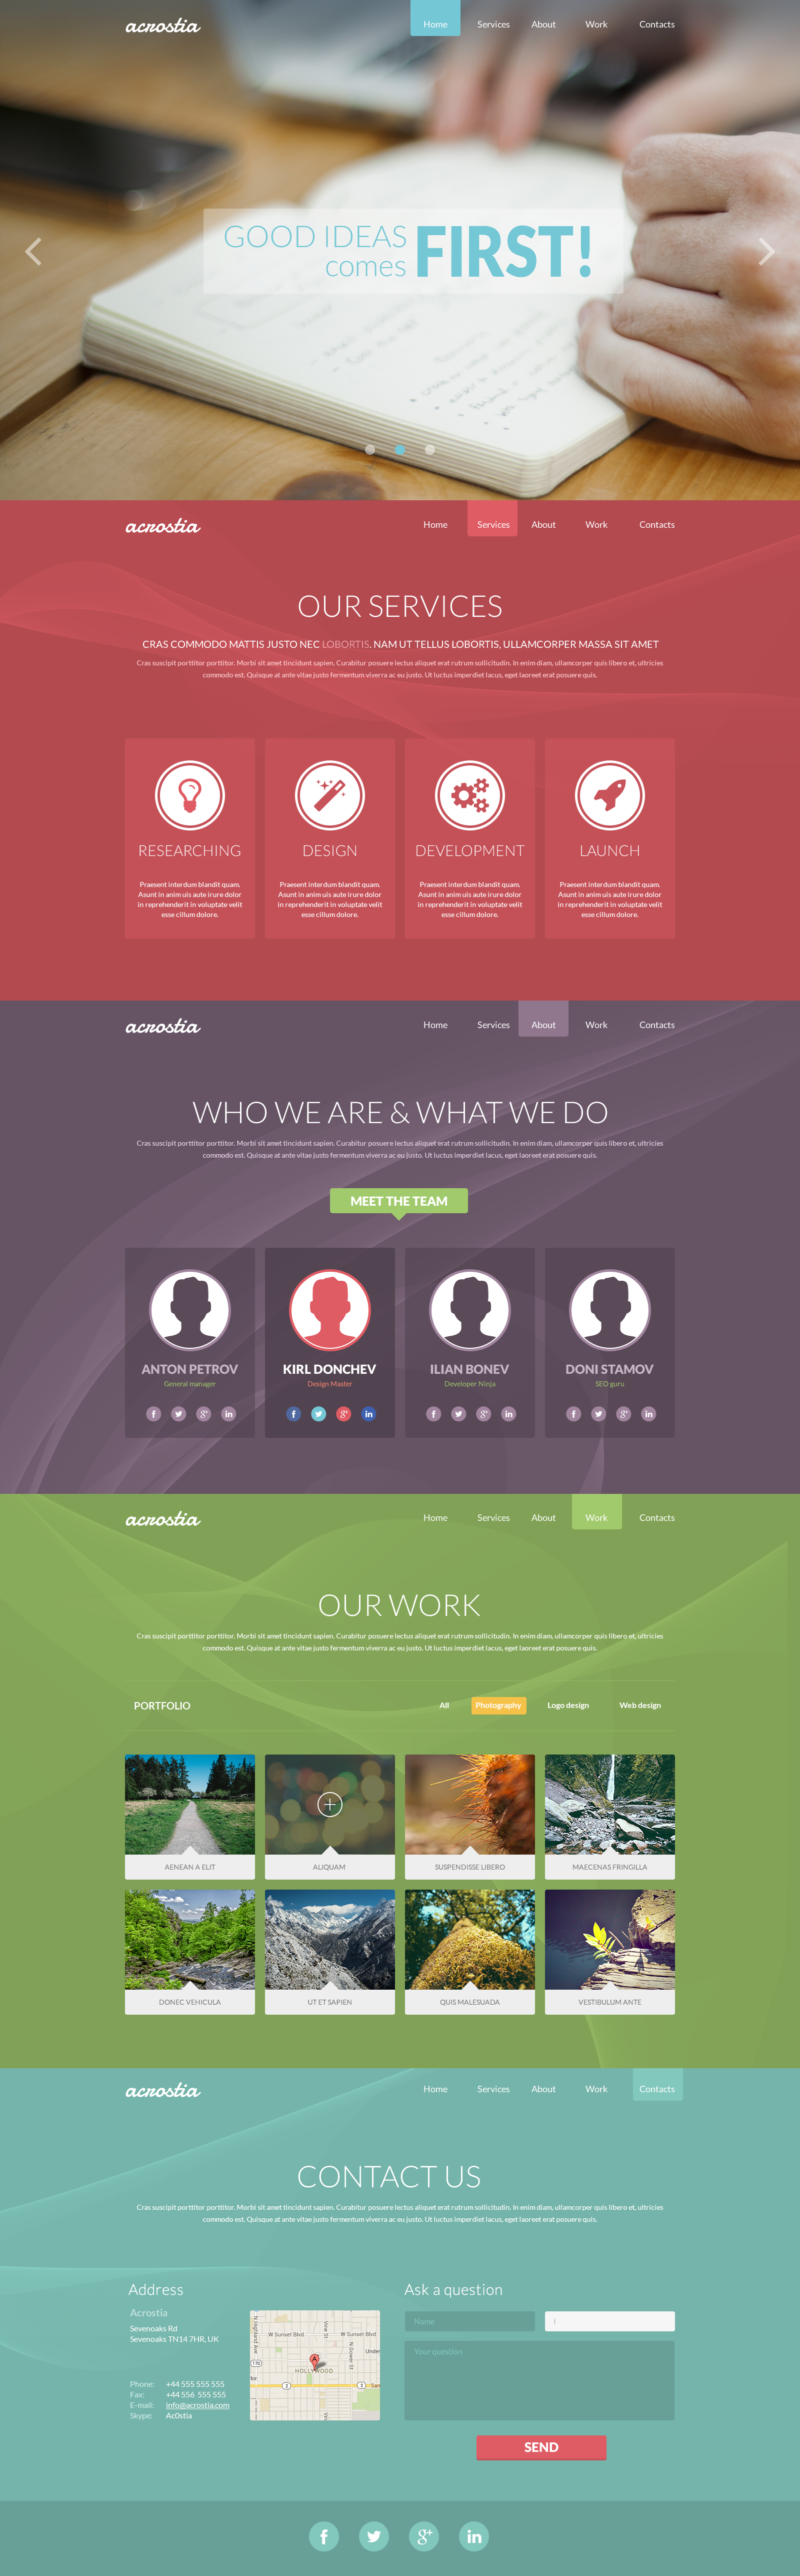 one-page-portfolio-flat-psd-template-download-psd